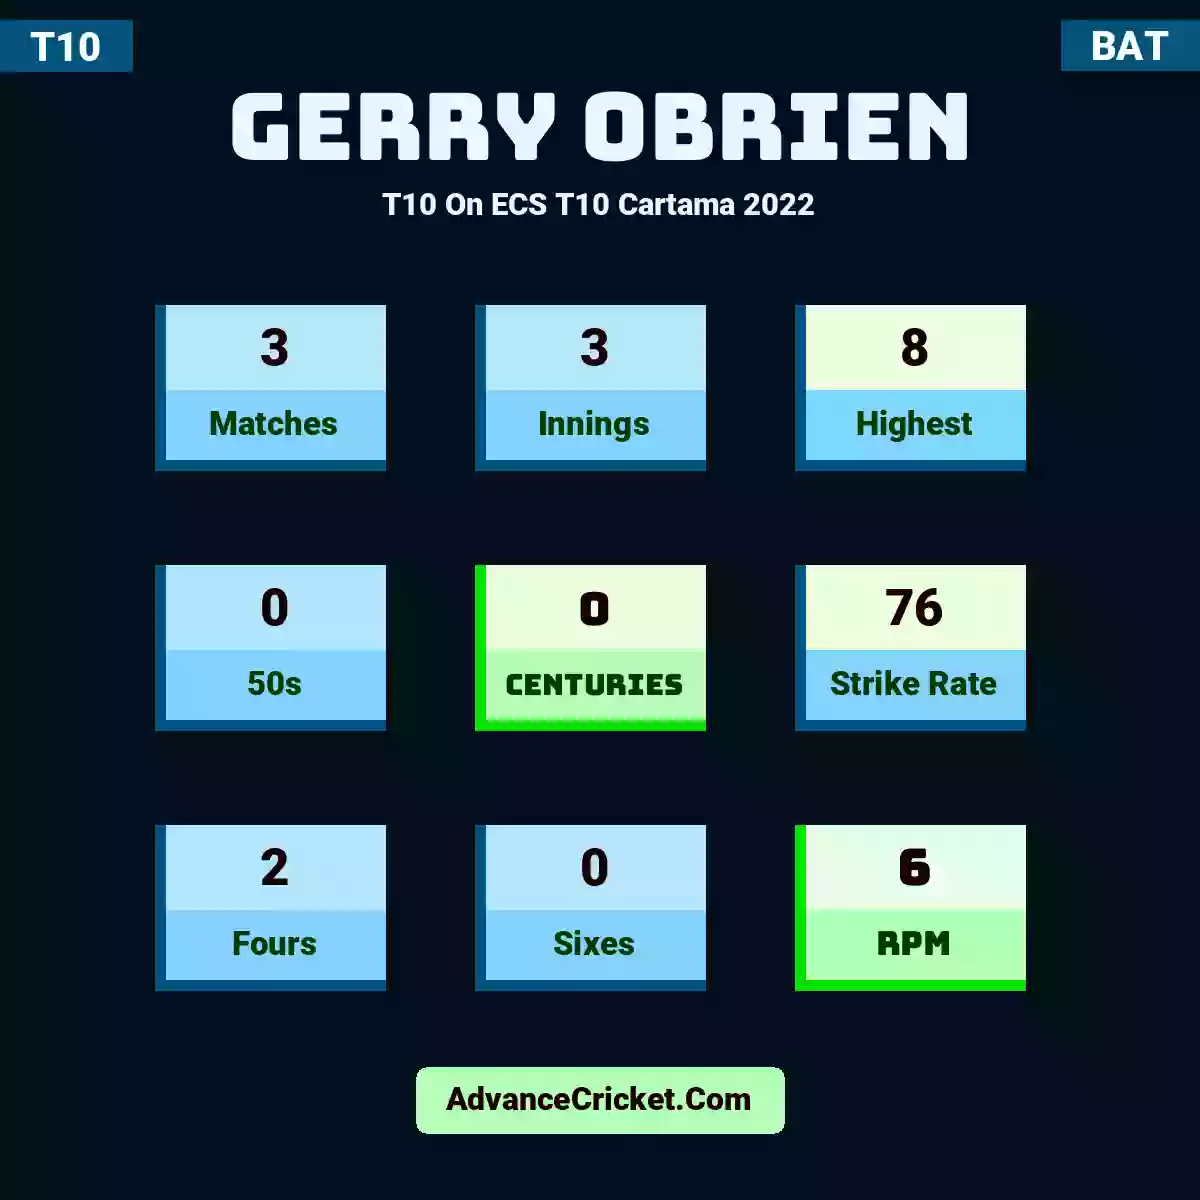 Gerry OBrien T10  On ECS T10 Cartama 2022, Gerry OBrien played 3 matches, scored 8 runs as highest, 0 half-centuries, and 0 centuries, with a strike rate of 76. g.obrien hit 2 fours and 0 sixes, with an RPM of 6.